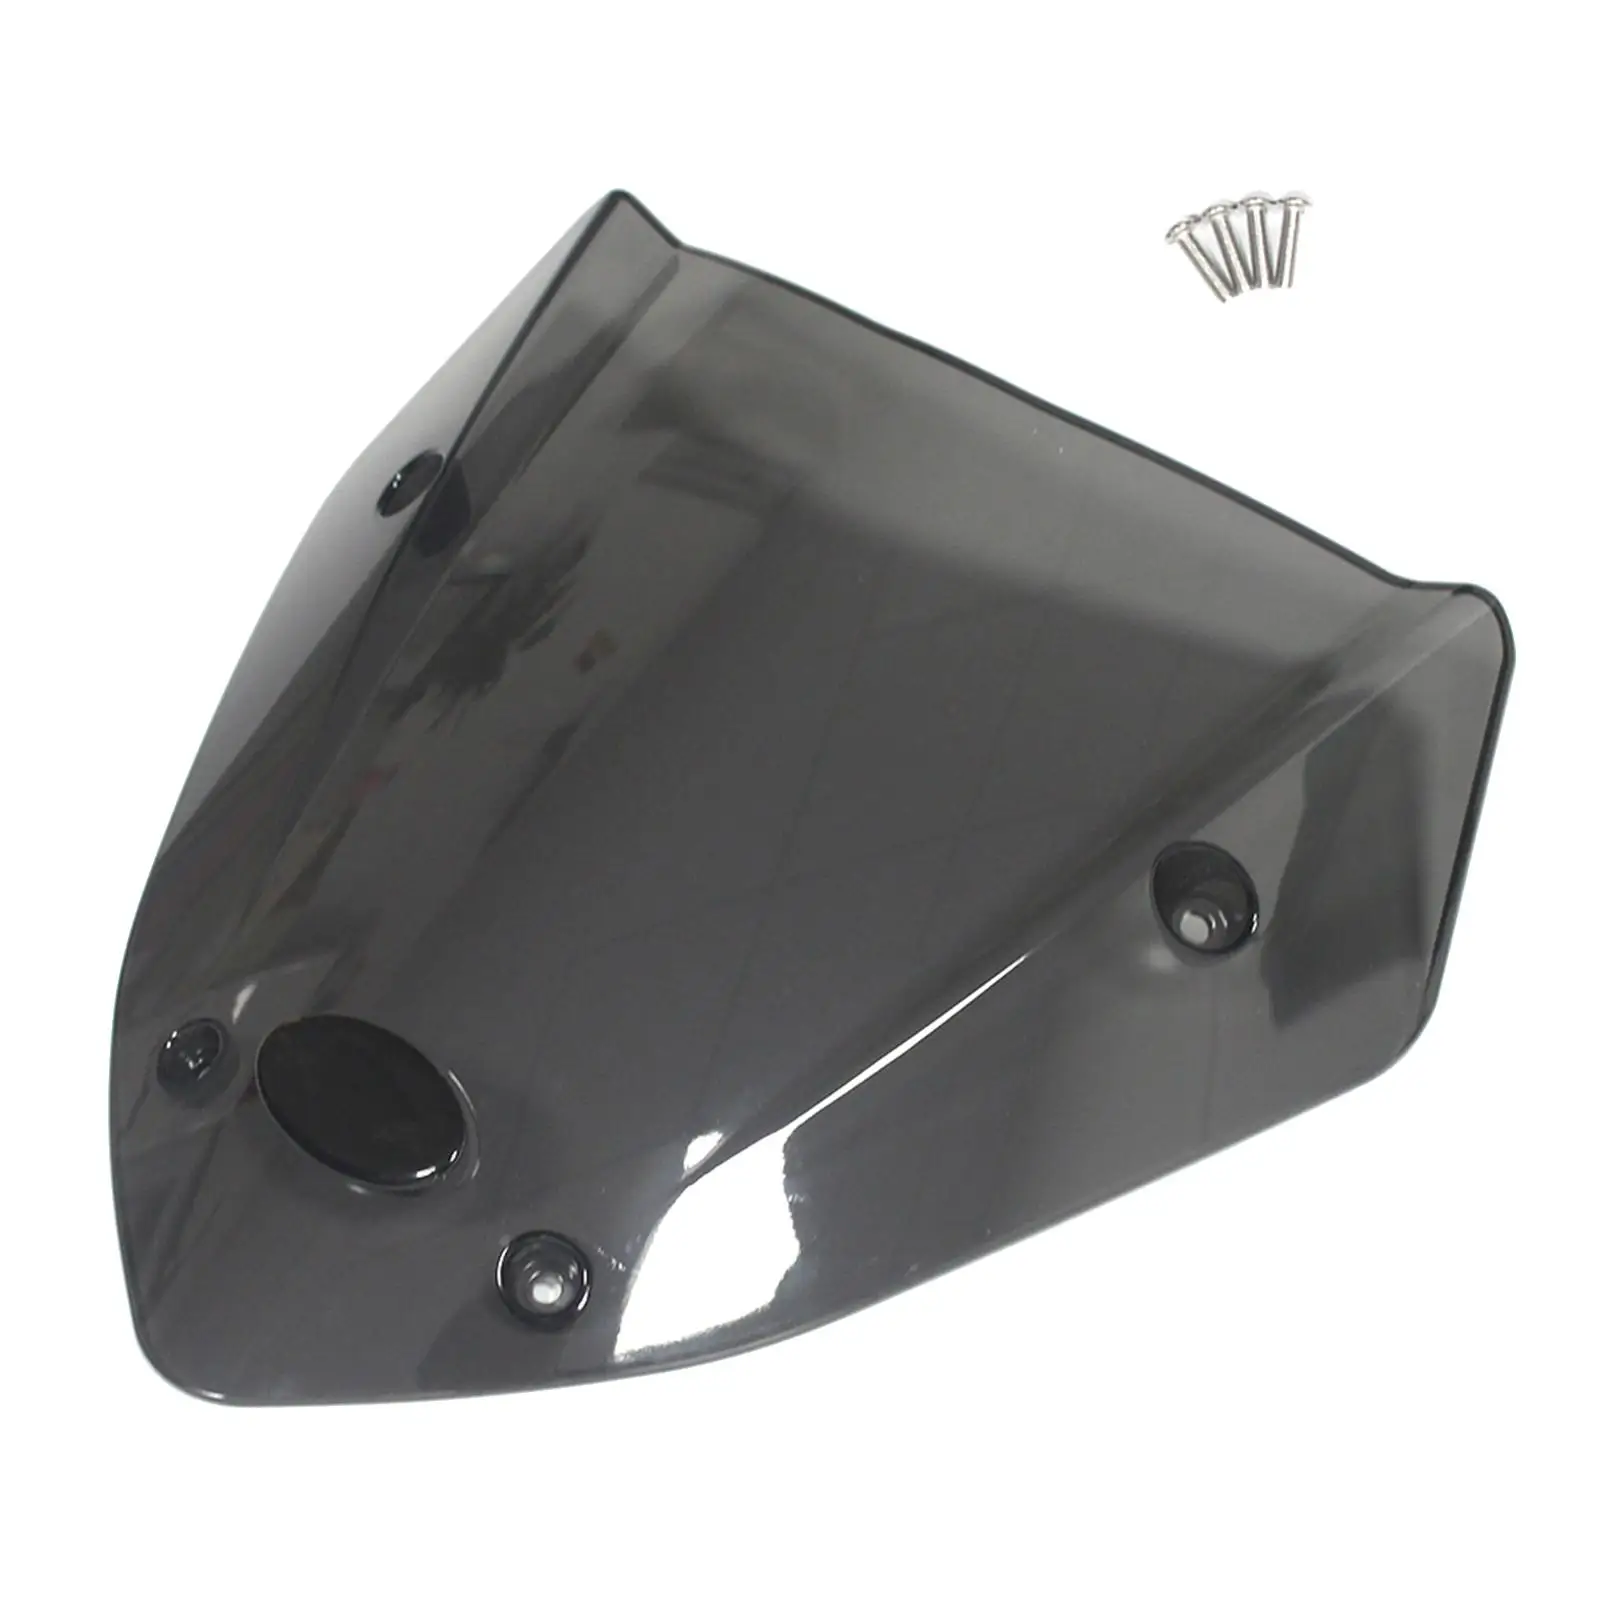 Motorcycle Windshield Wind Deflector Visor  00 250 125 Sturdy High Performance Replacement Accessories